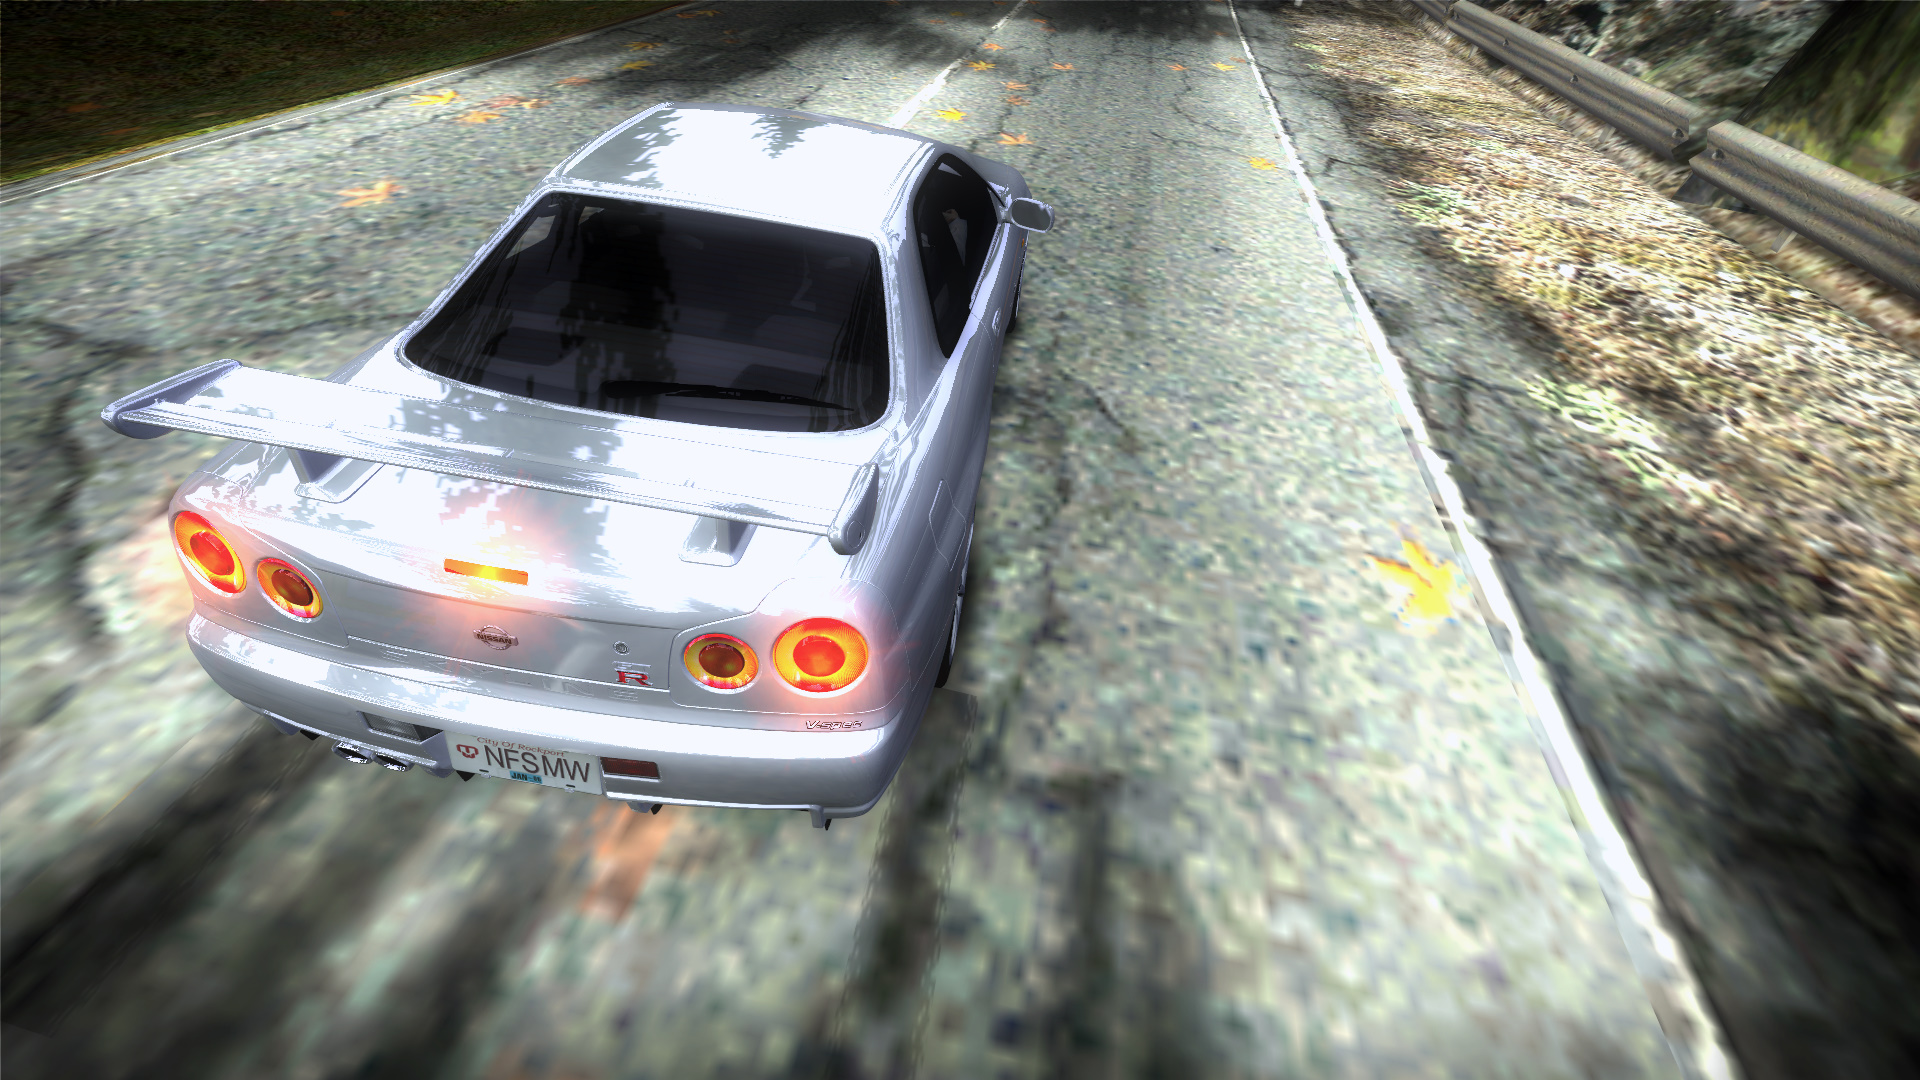 Need For Speed Most Wanted 1999 Nissan Skyline R34 GT-R